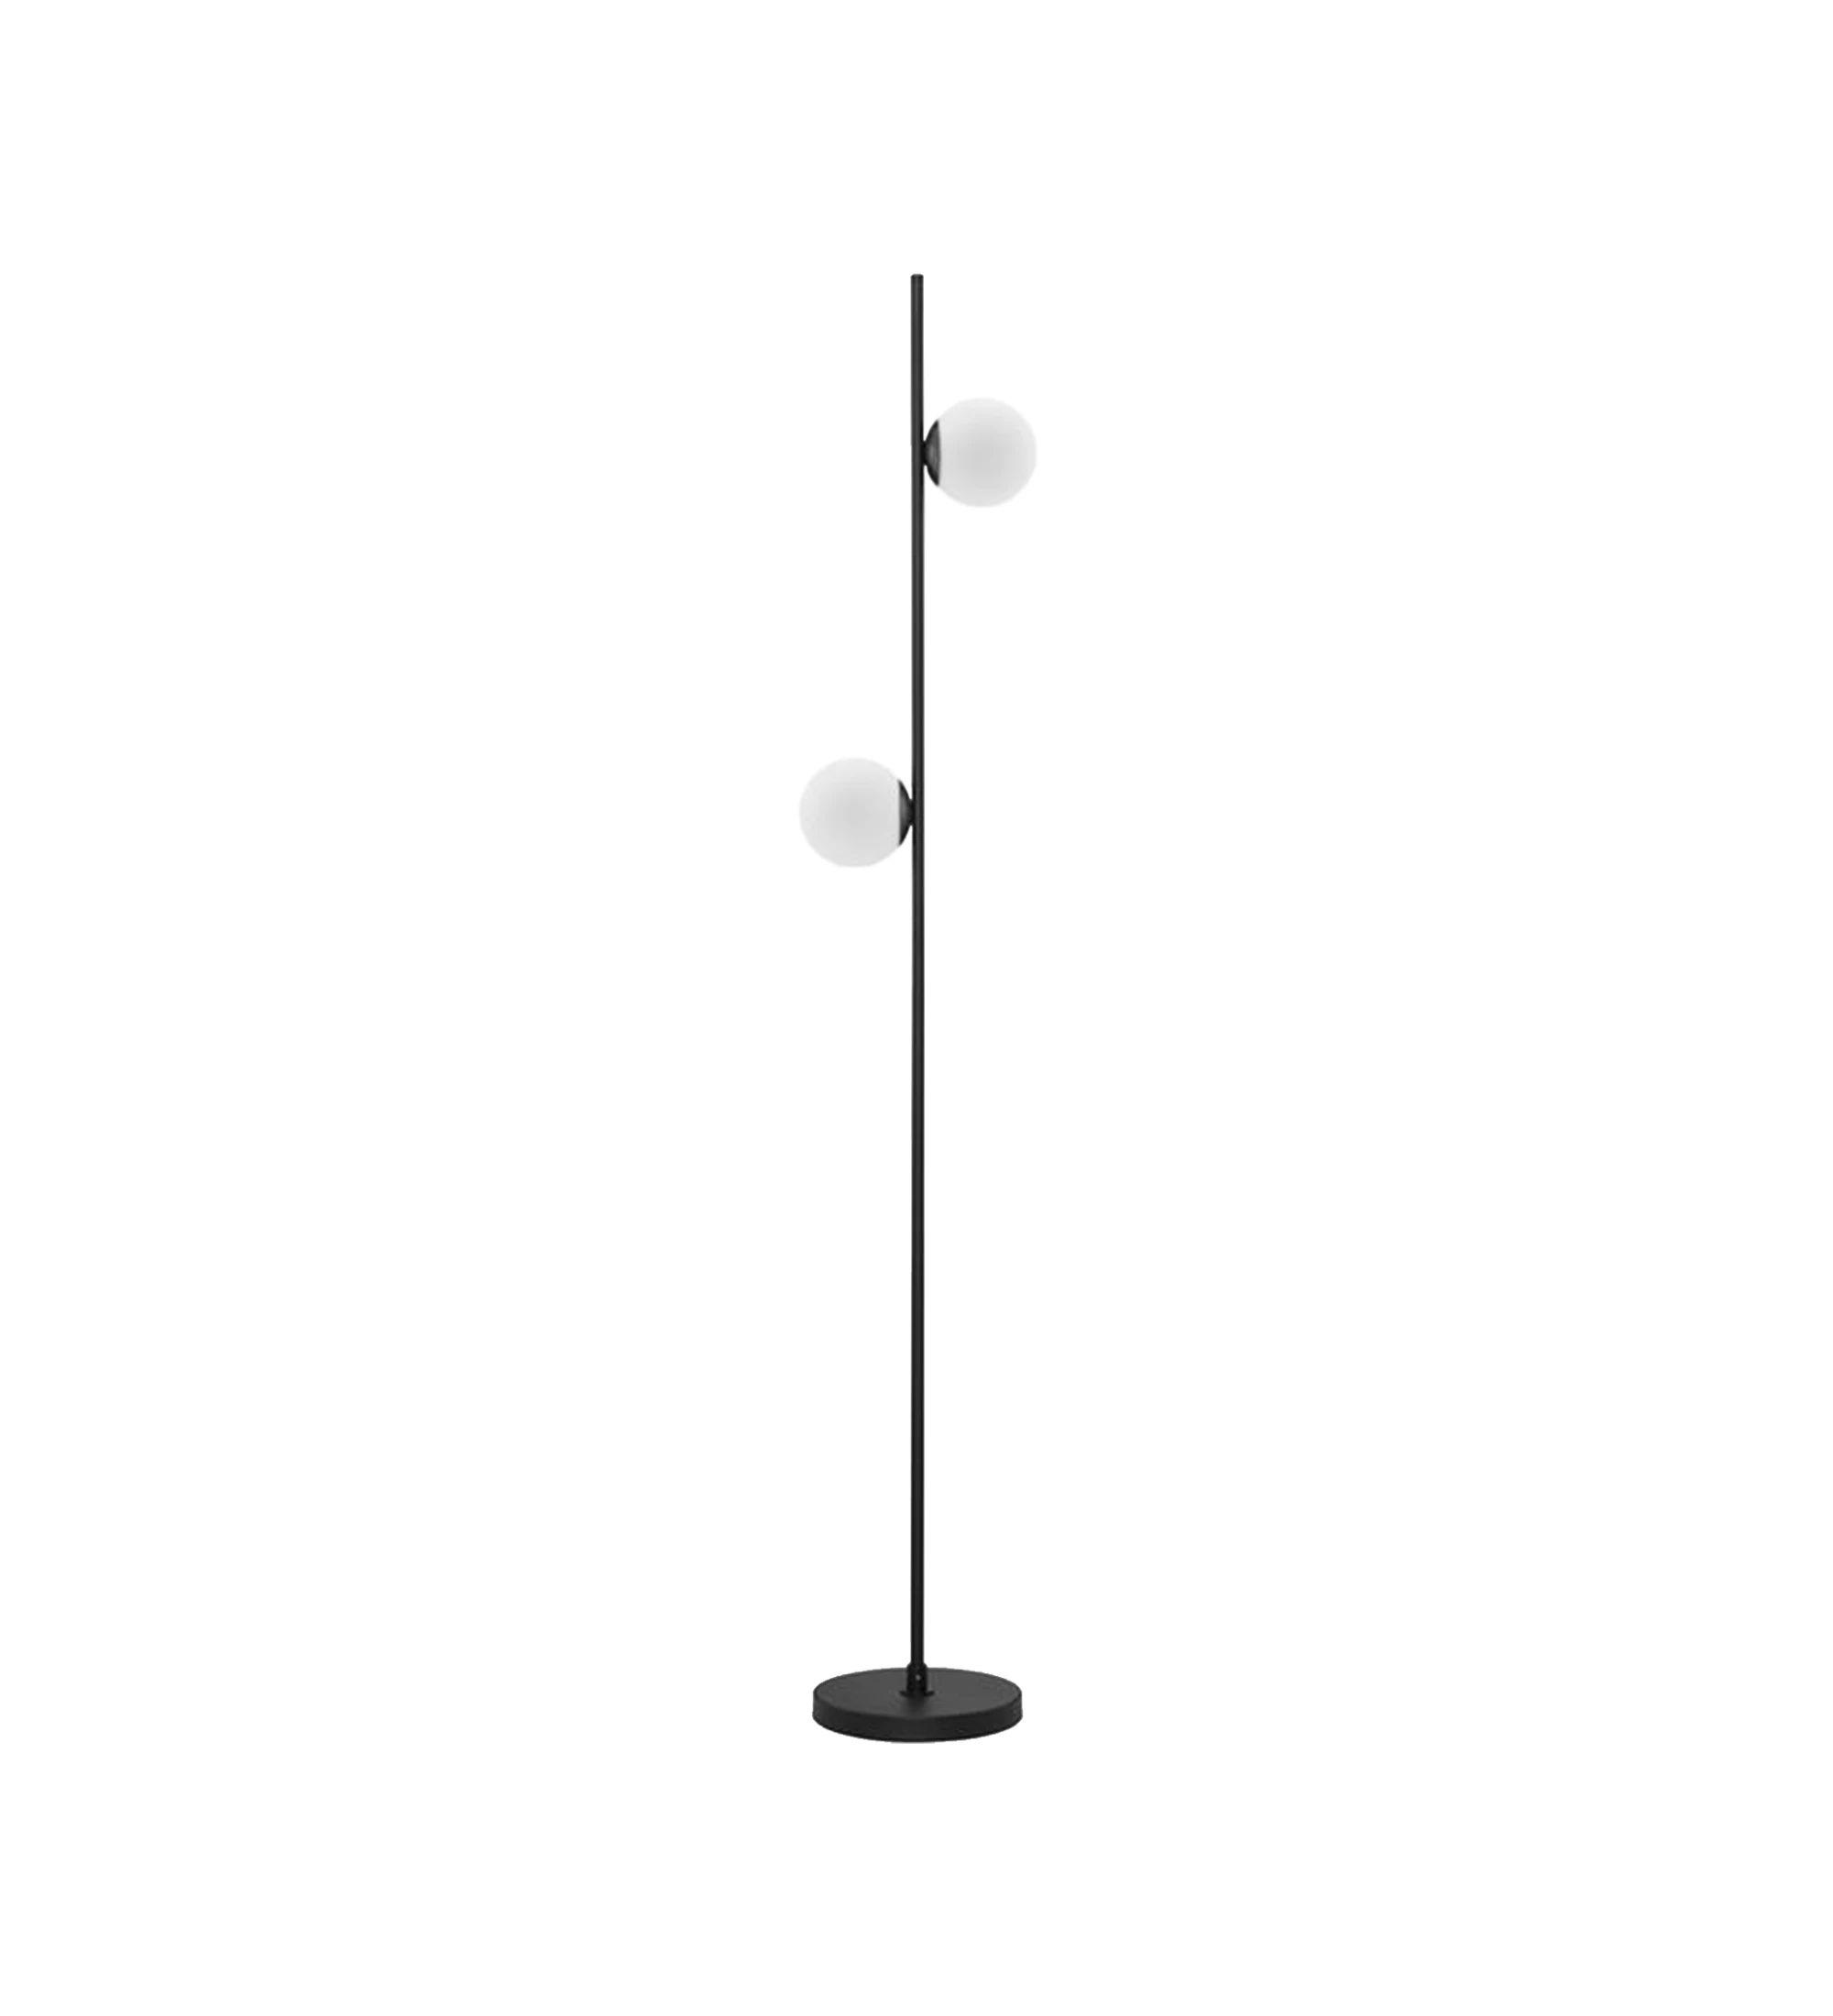 Floor lamp in black aluminum with opal glass diffusers.